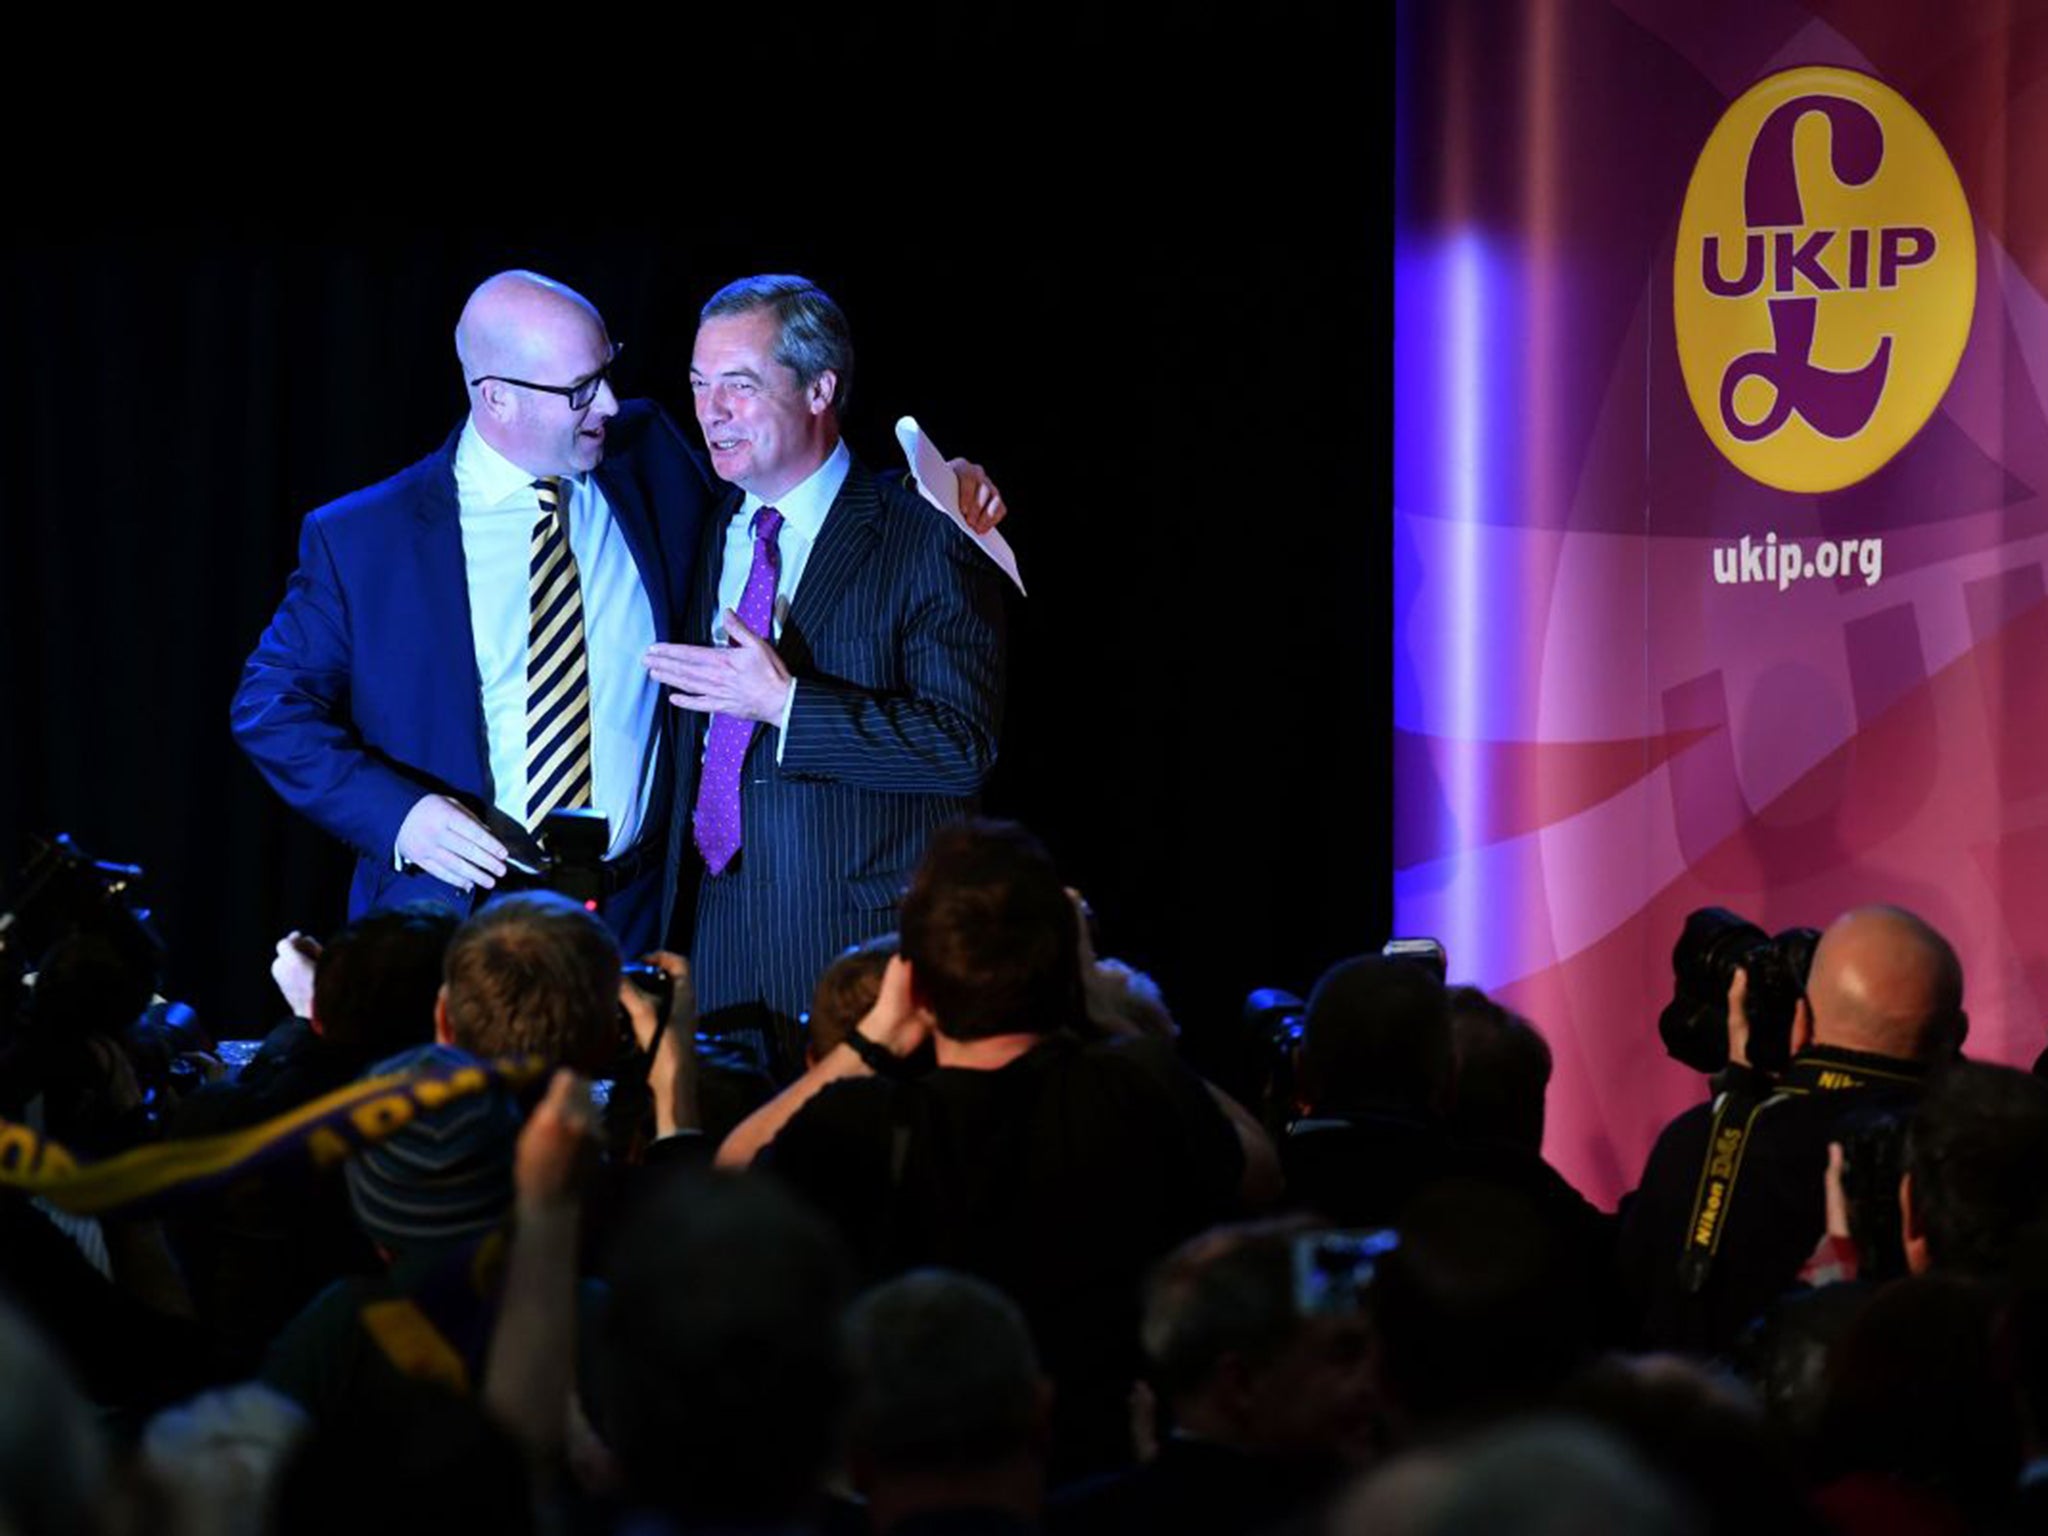 Paul Nuttall and Nigel Farage on stage after the leadership election announcement yesterday